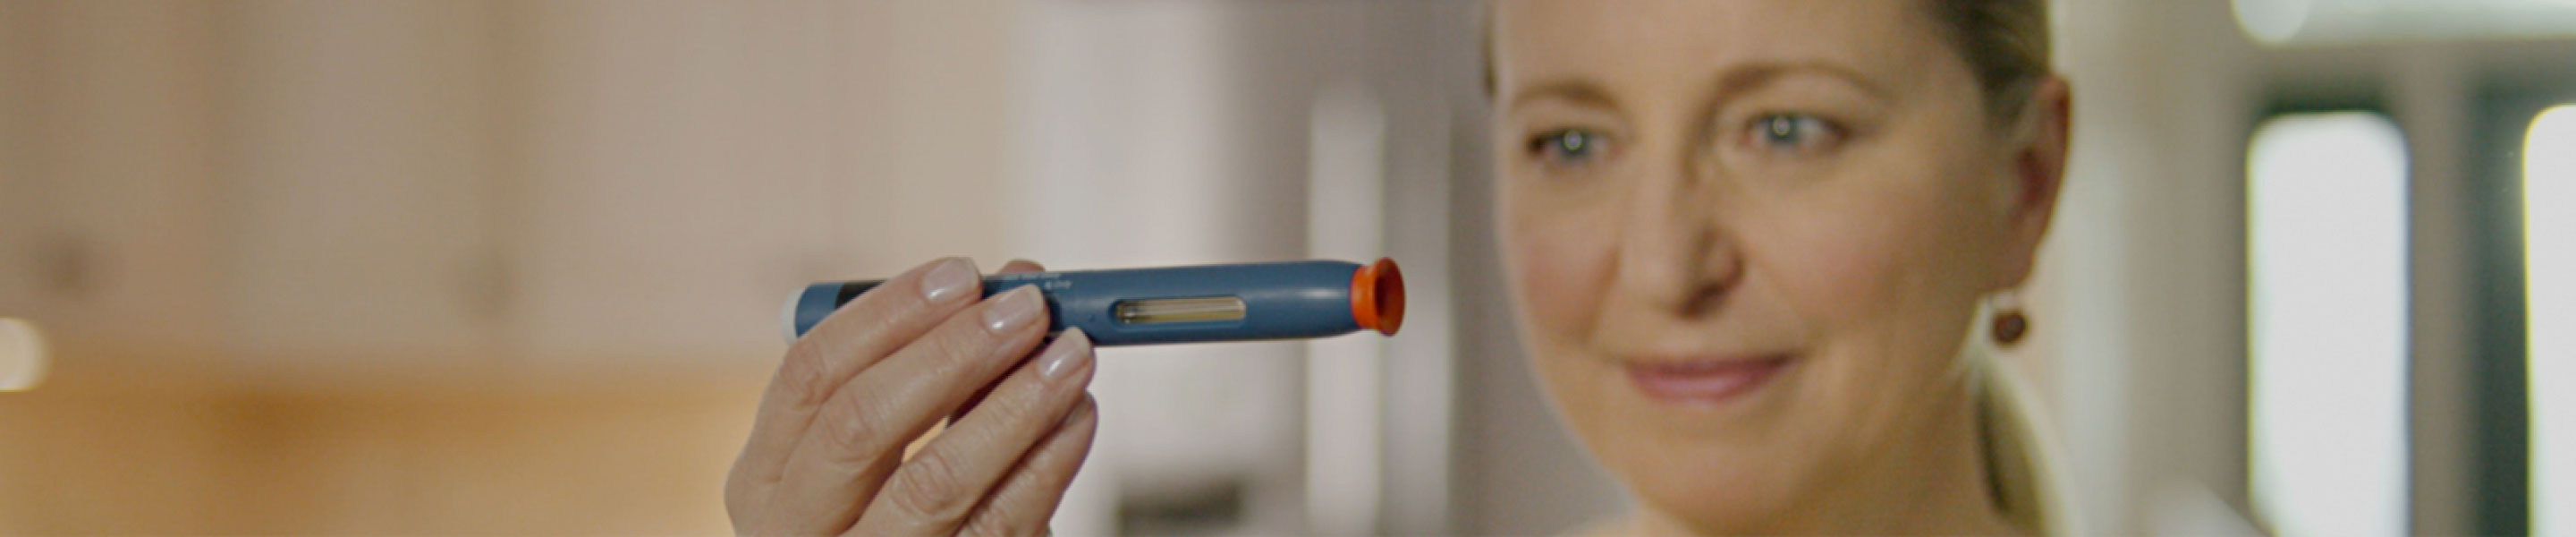 WOMAN EXAMINES AUTOINJECTOR